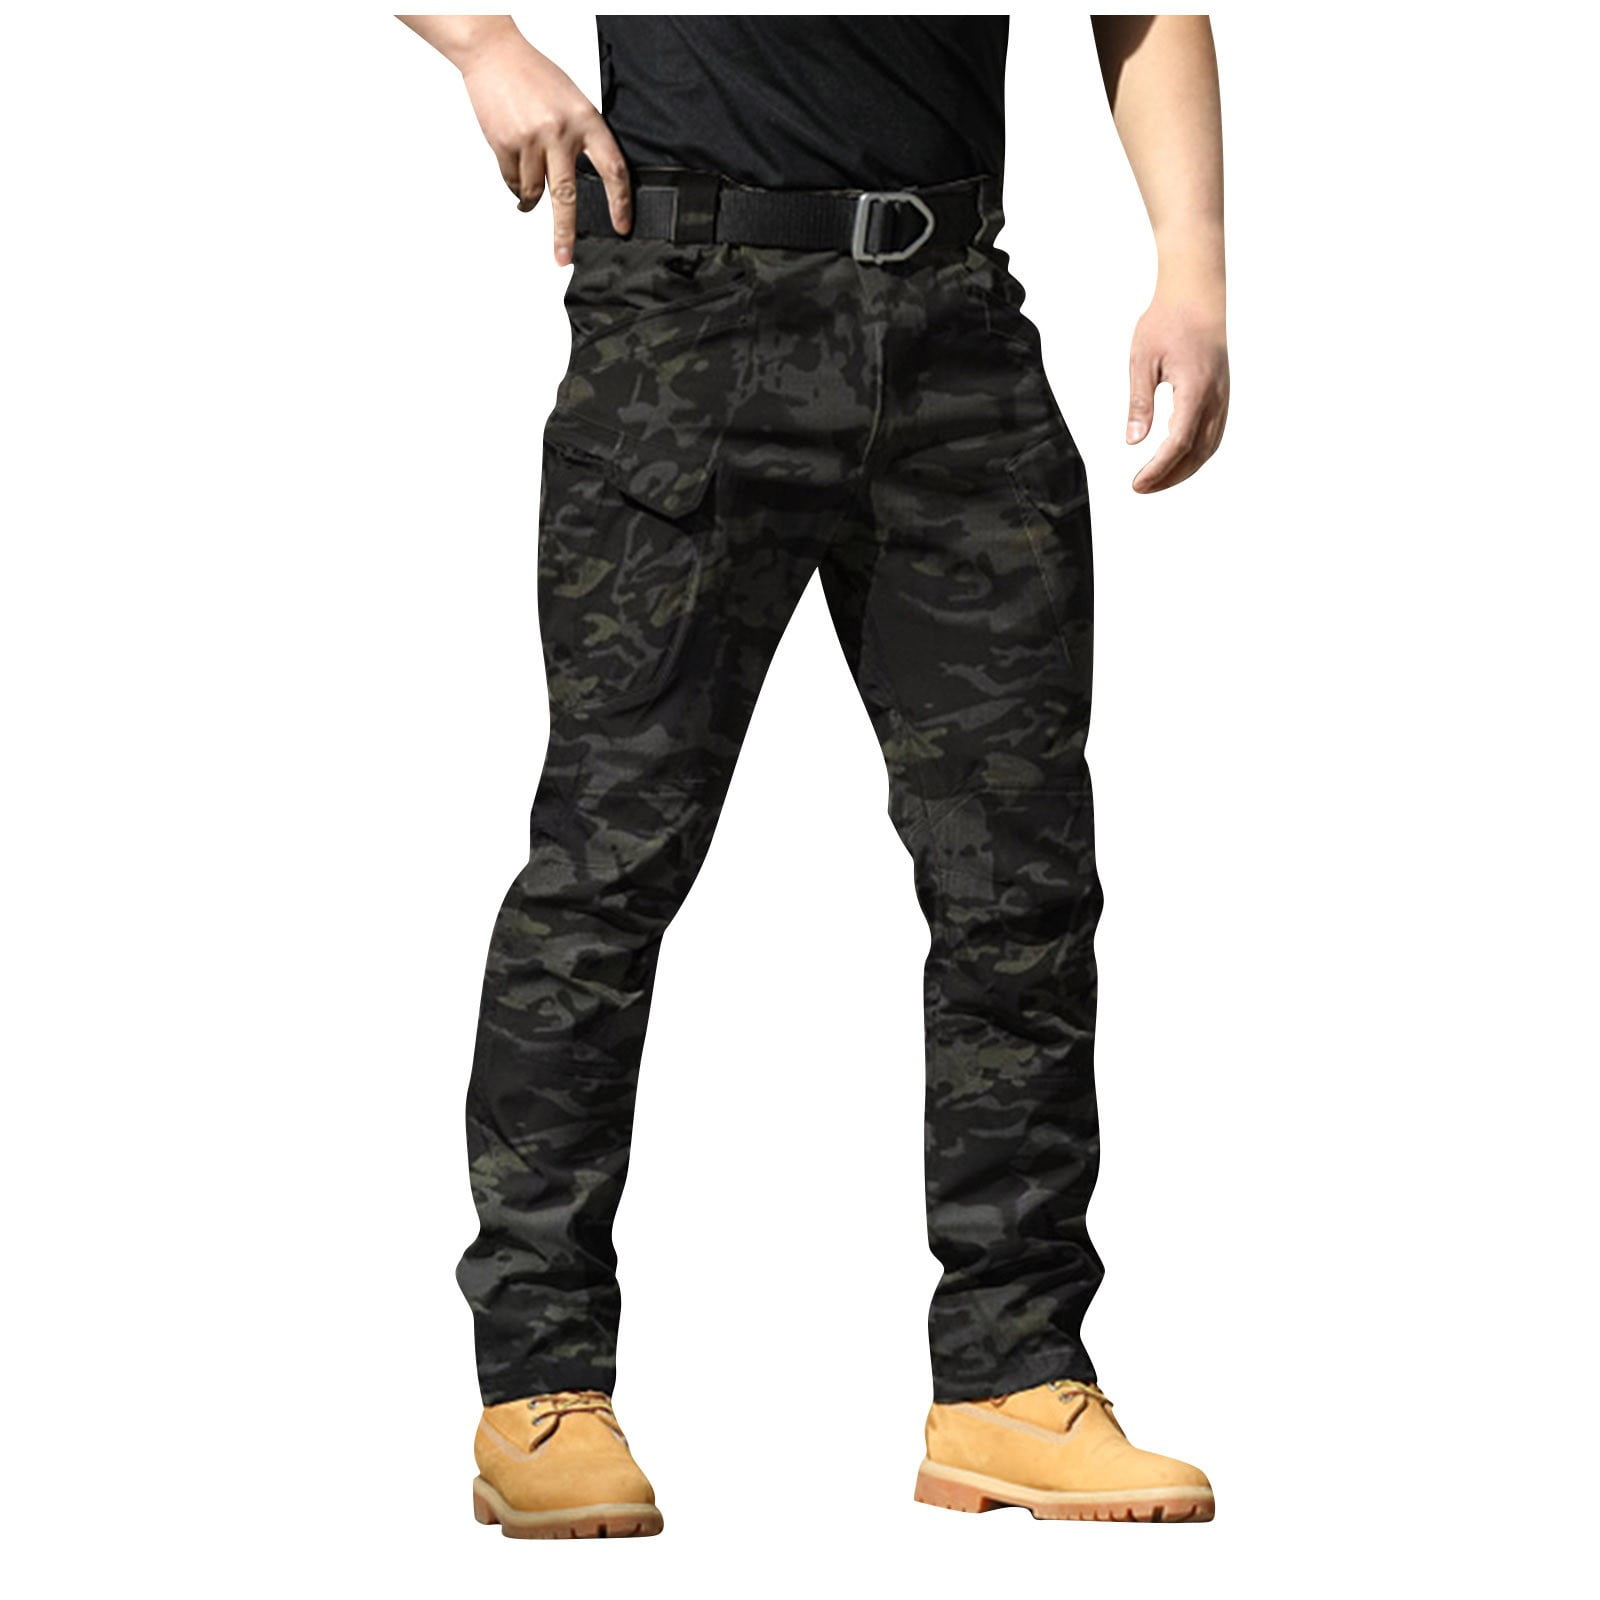 TQWQT Camo Cargo Pants for Men Relaxed Fit Cotton Casual Work Hiking Pants  Mens Tactical Military Army Pants with Multi Pockets Camouflage L